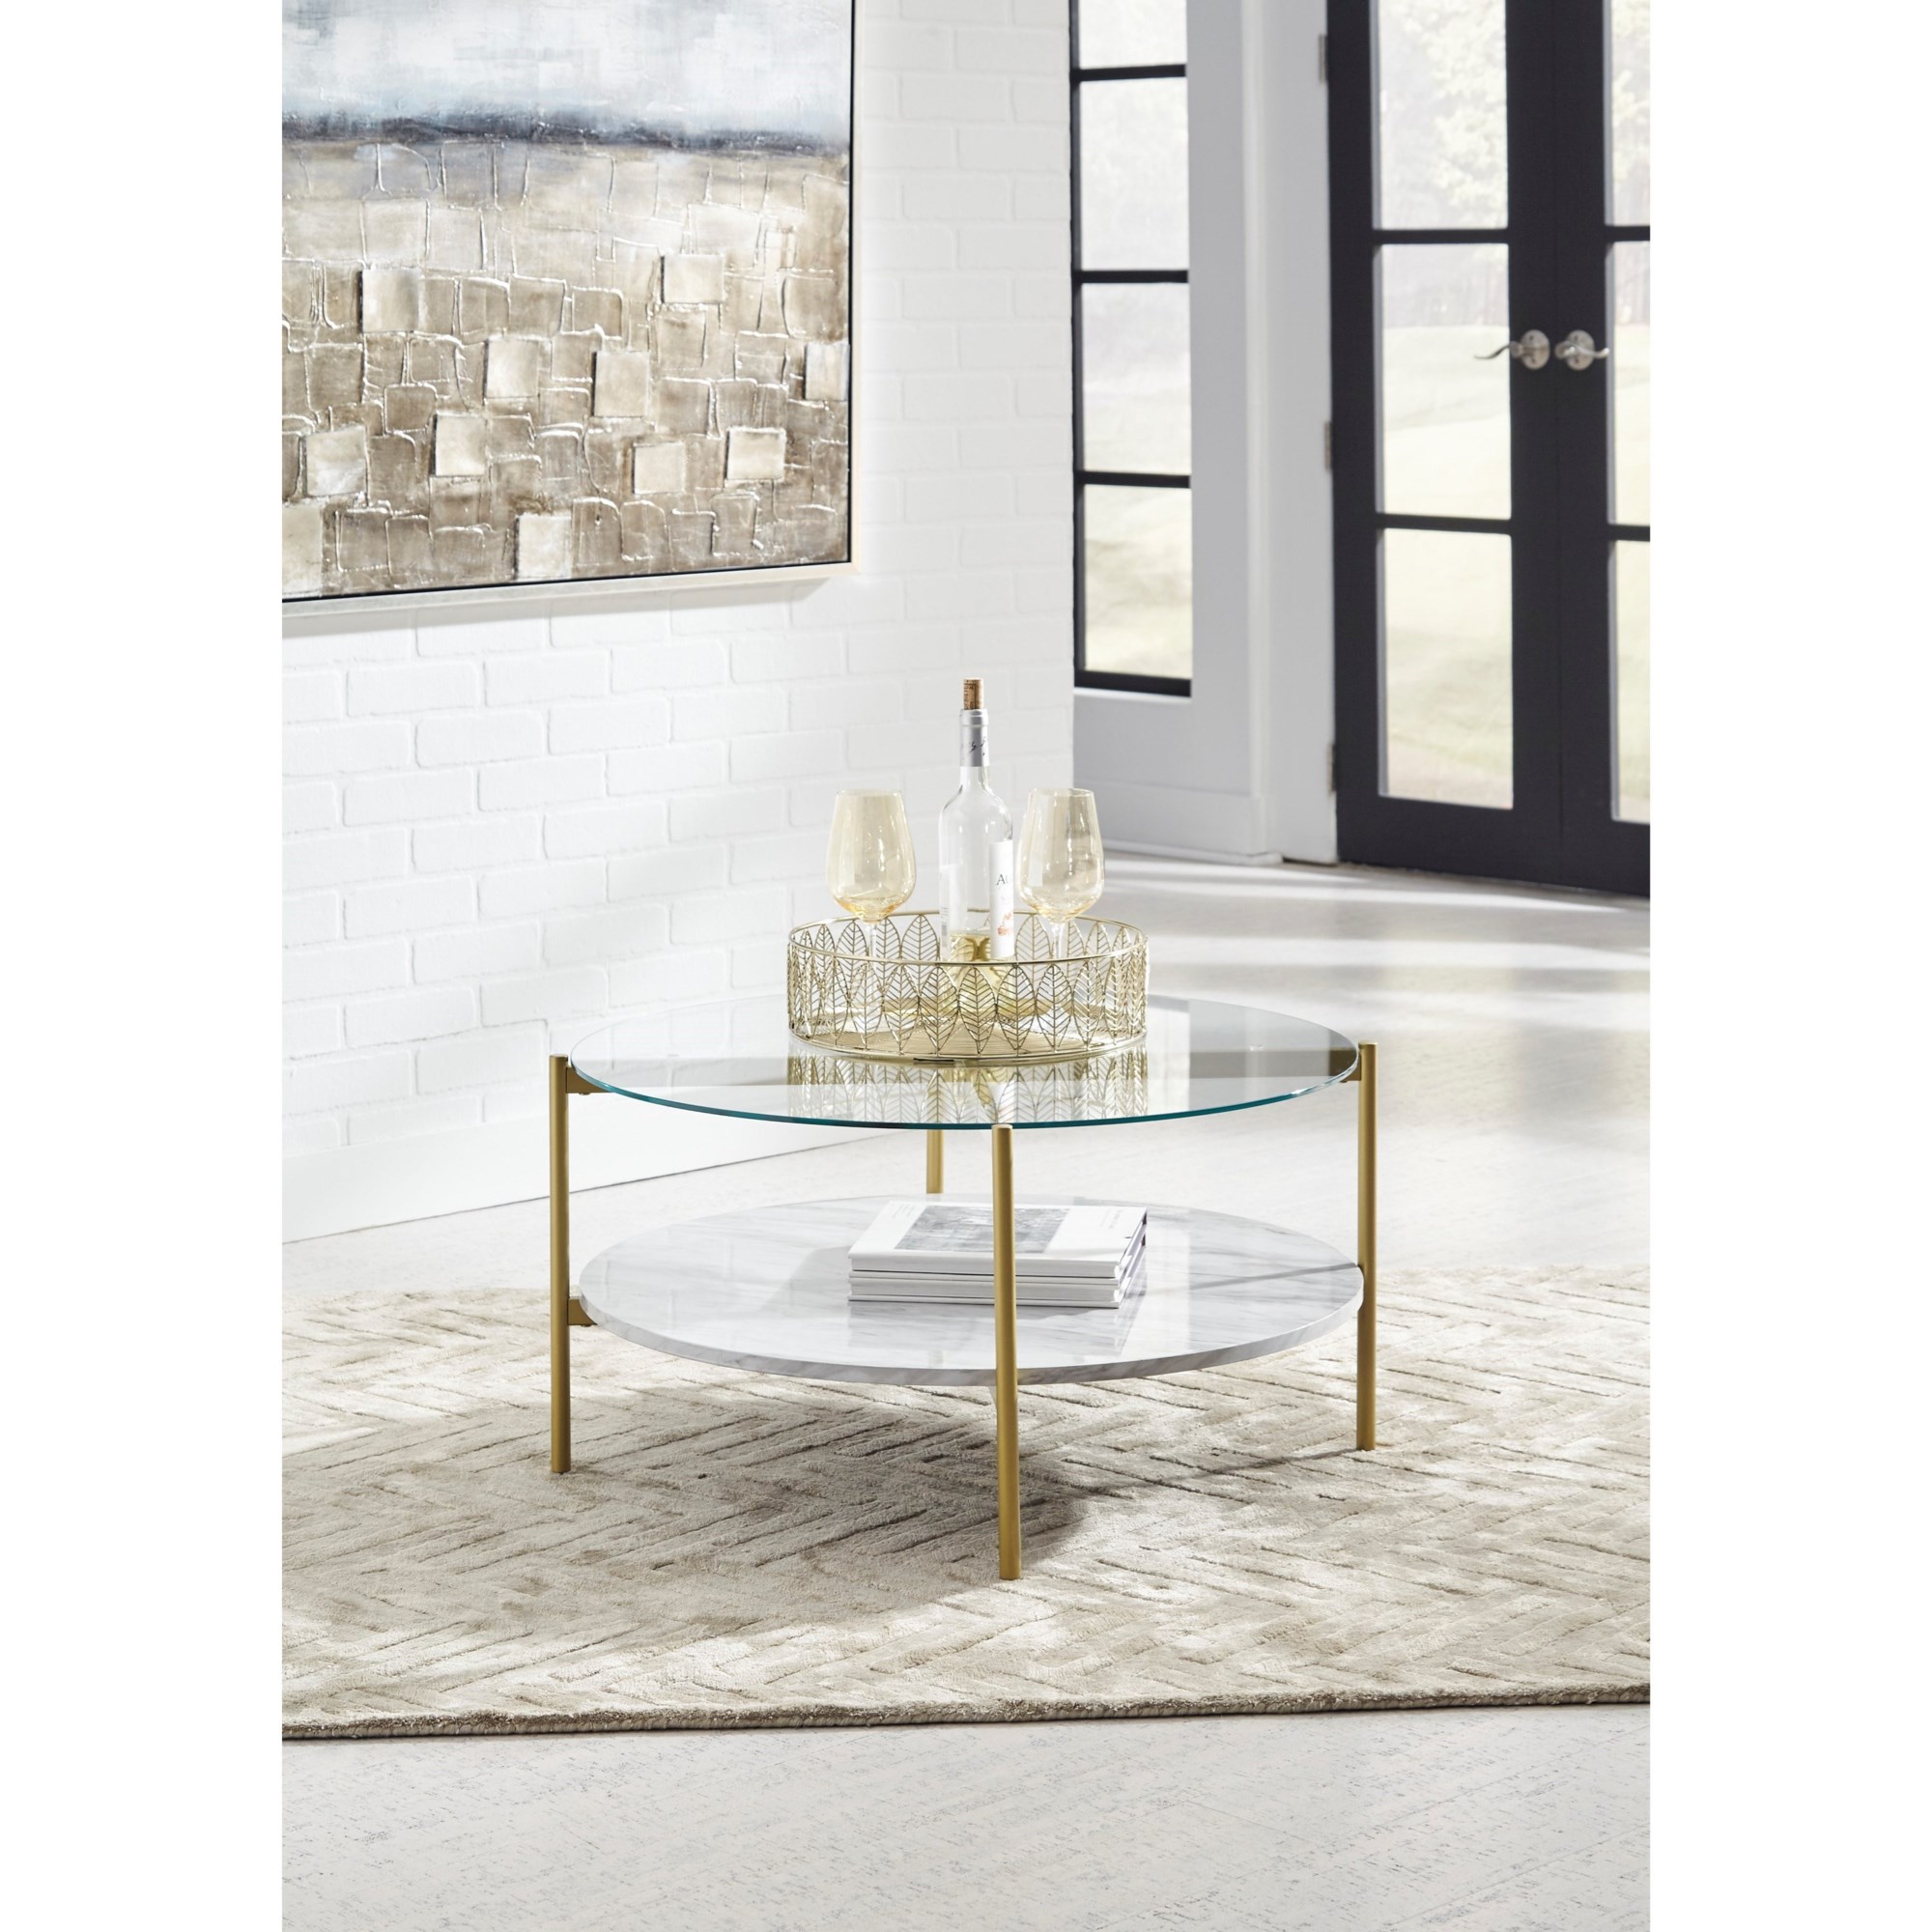 Top Signature by Glass Gold Furniture with Tables Cocktail/Coffee Faux Shelf Round HomeWorld Table Marble Ashley T192-8 | and Finish Wynora Cocktail Design |